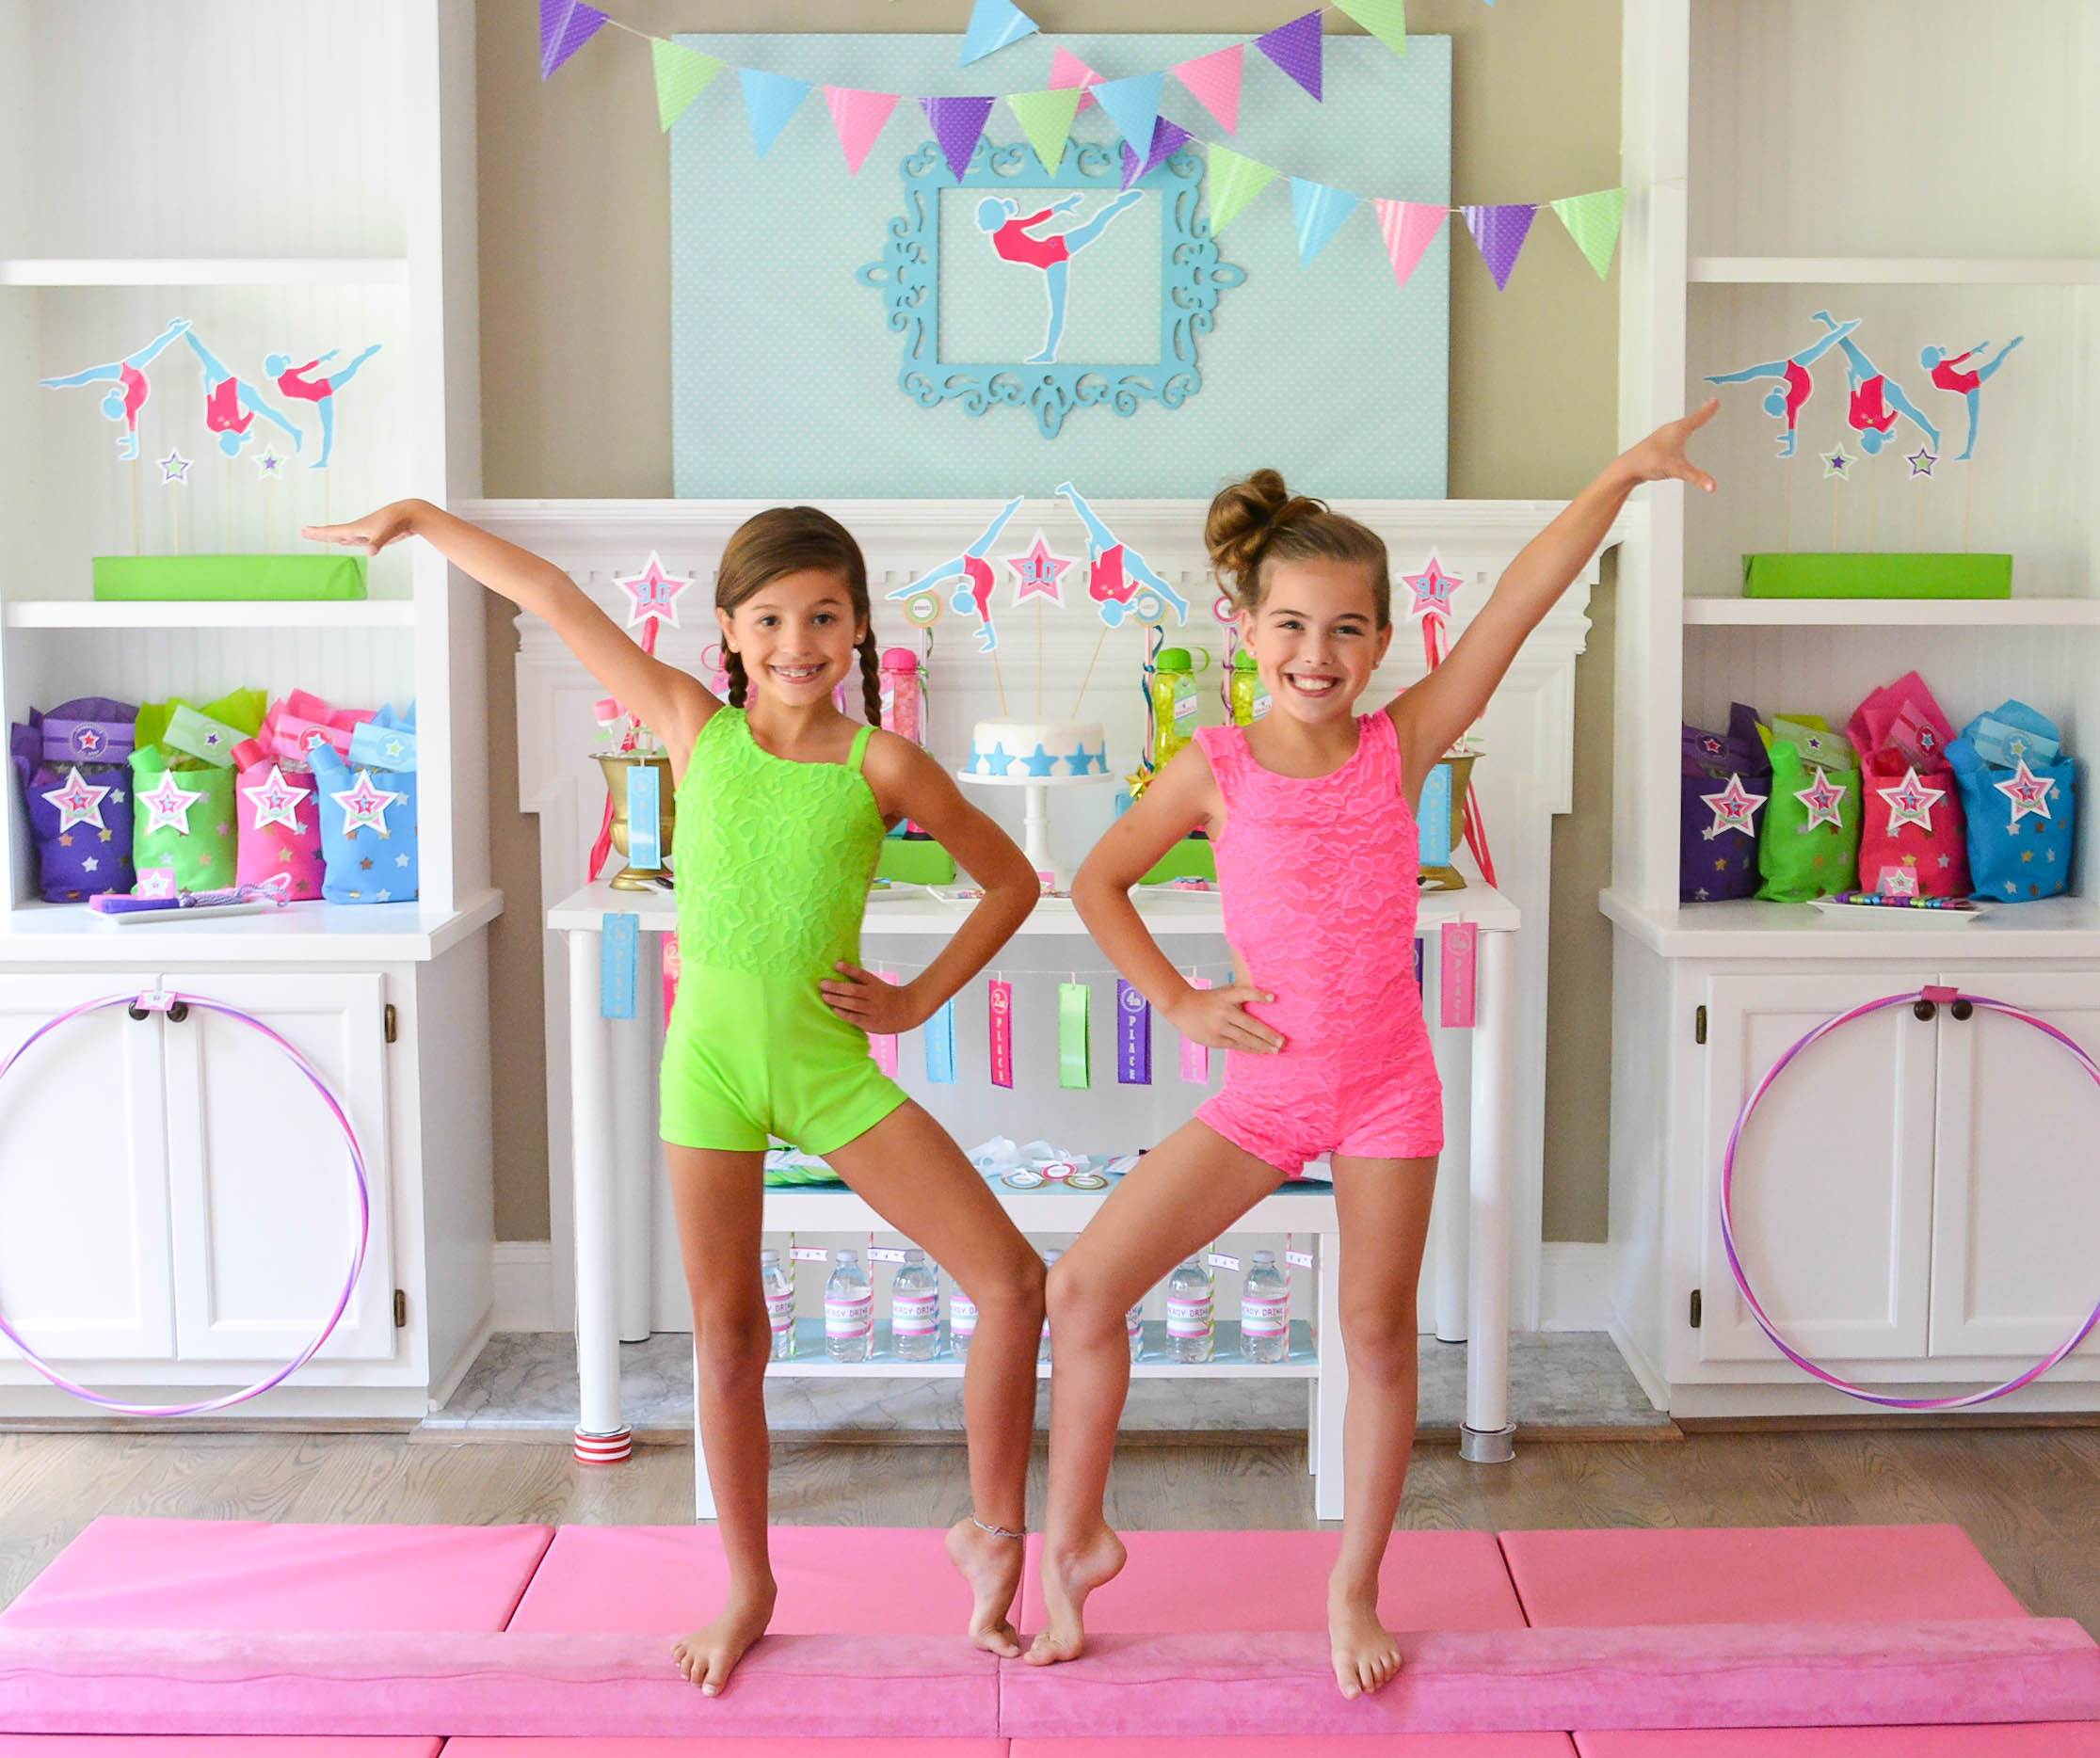 Pool Party Ideas For 11 Year Olds
 Gymnastics birthday